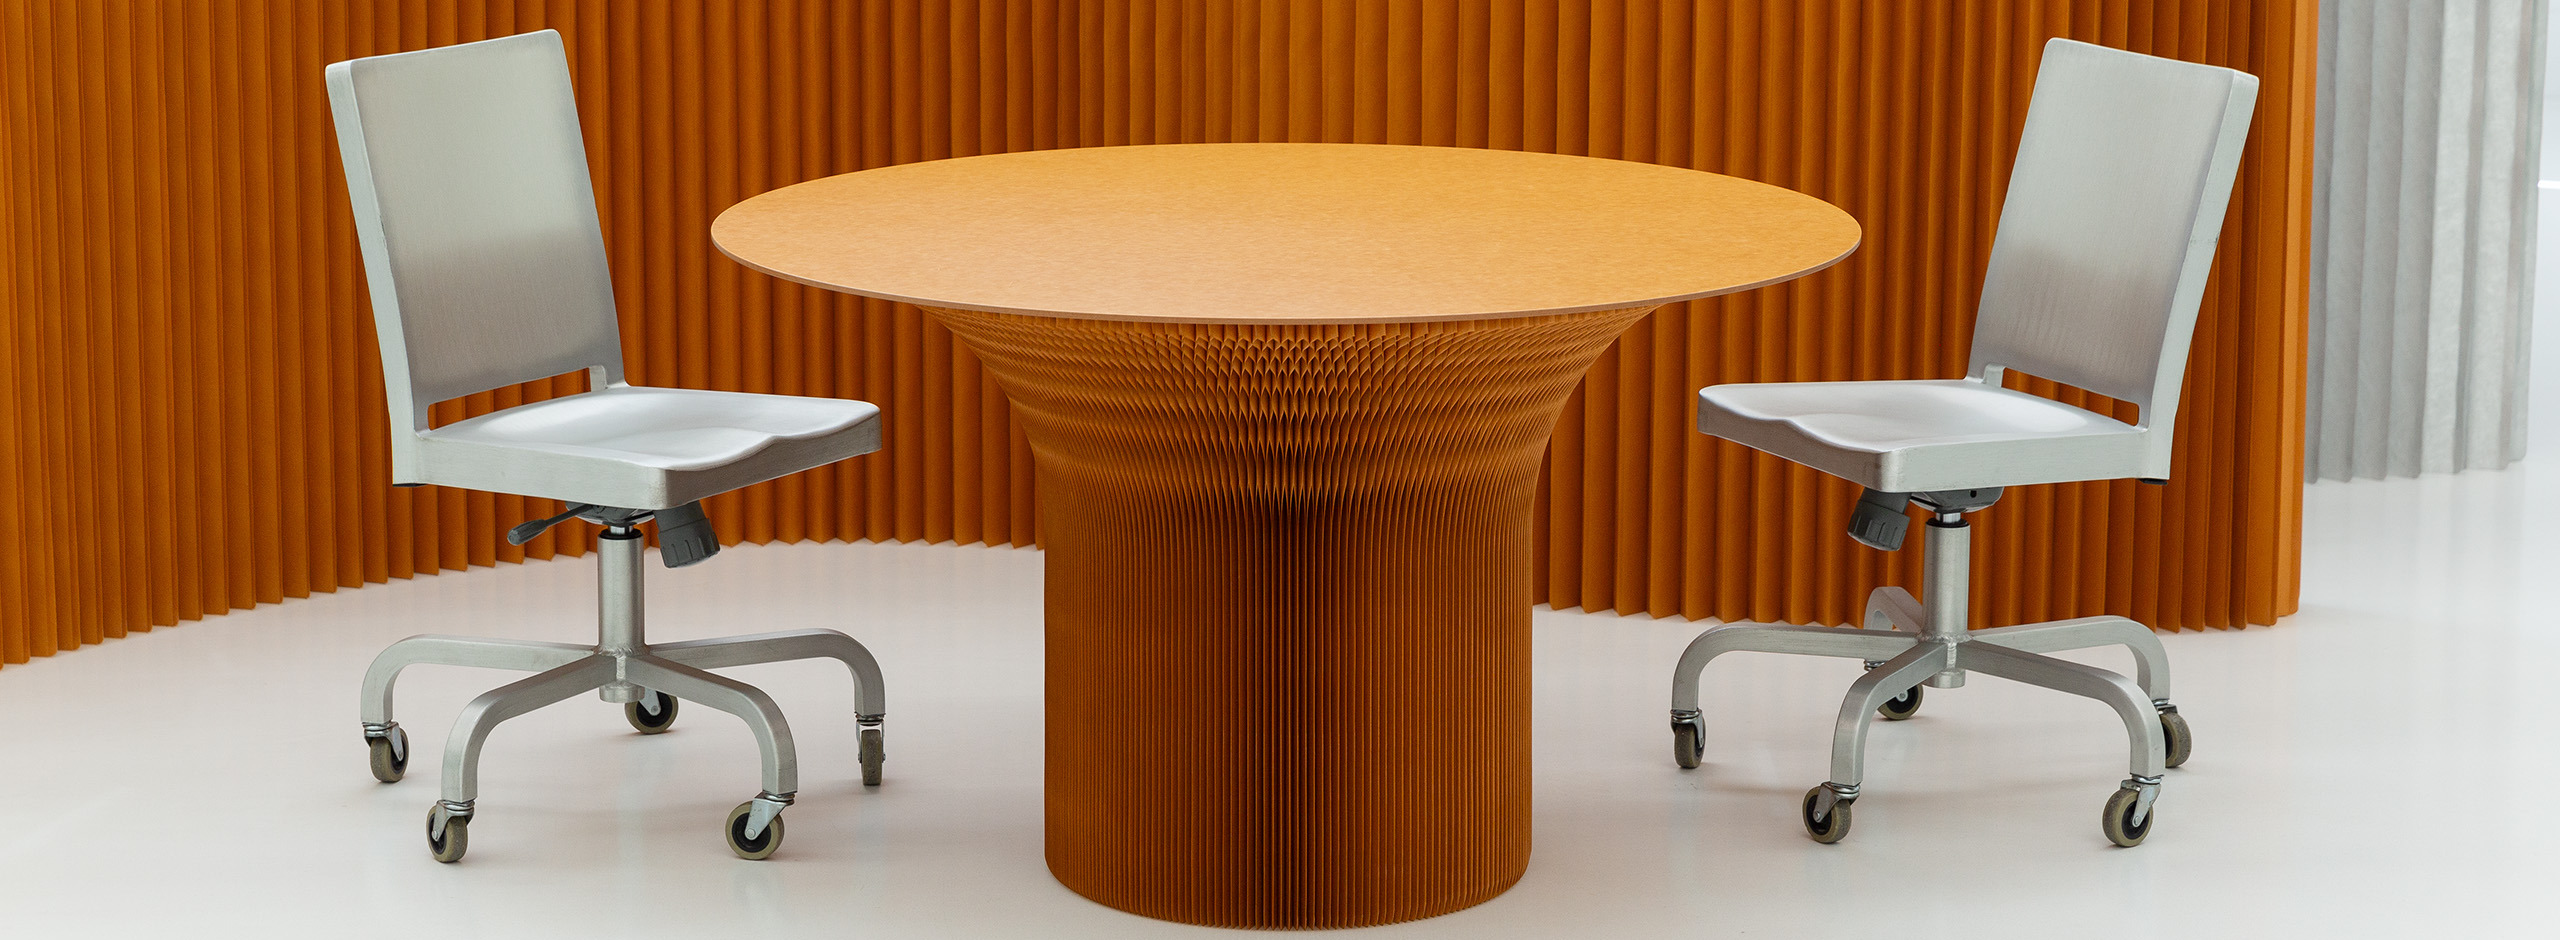 cantilever table PaperStone with Emeco chairs